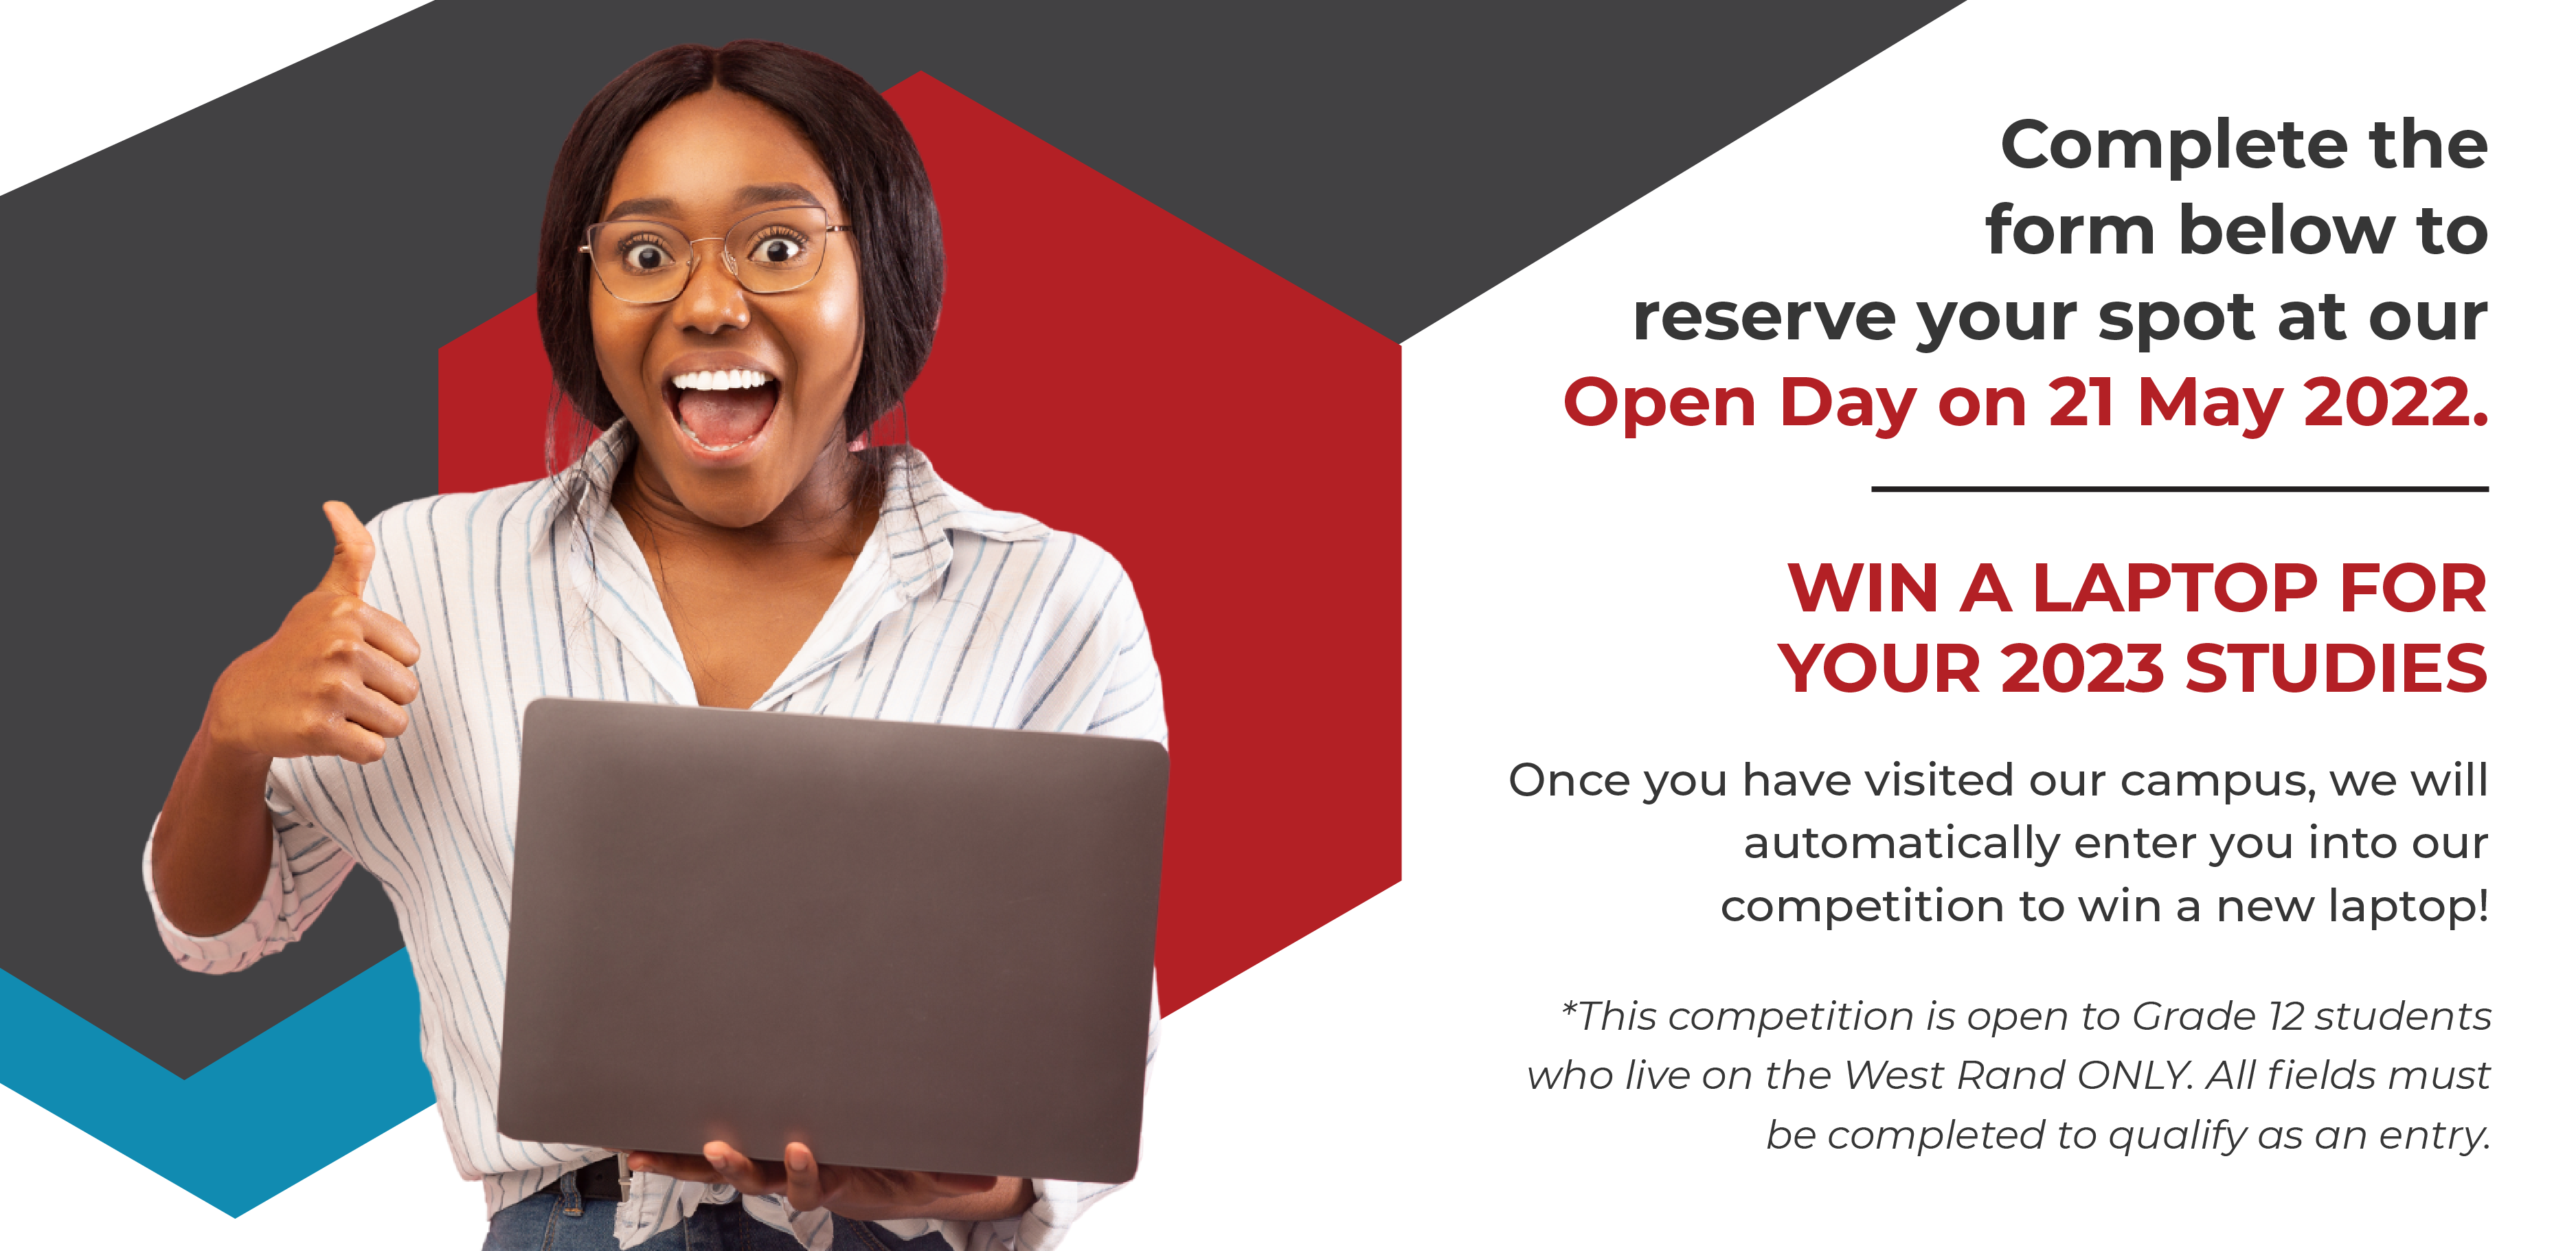 Register for Open Day 21 May 2022